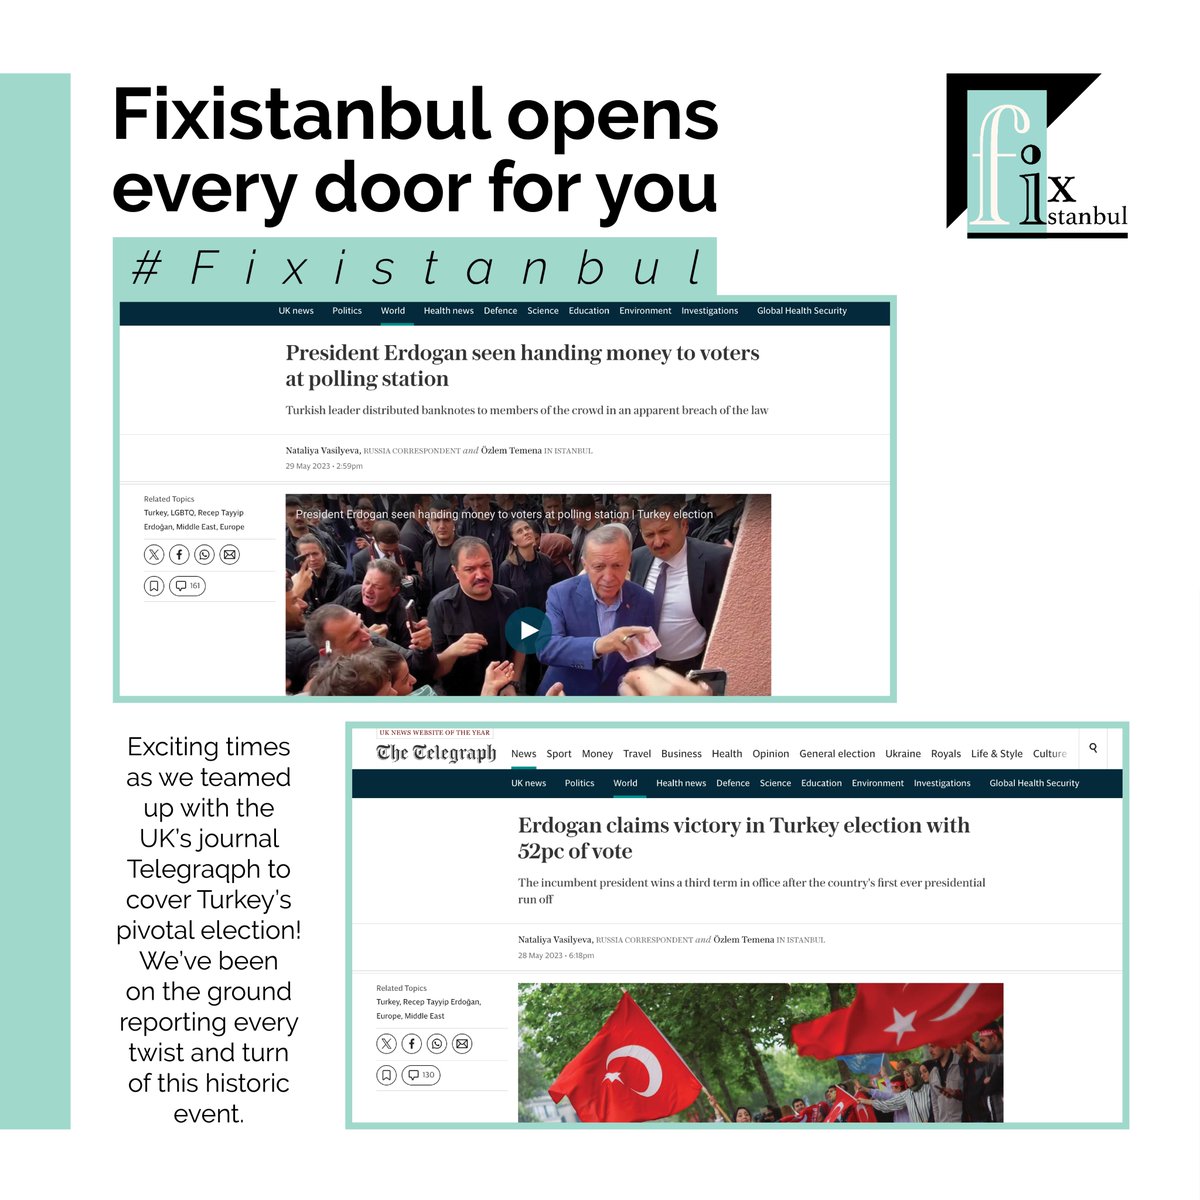 Fixistanbul opens every door for you 

📰 Exciting times as we teamed up with the UK's journal Telegraqph to cover Turkey's pivotal election! We've been on the ground reporting every twist and turn of this historic event.
#ElectionCoverage #TurkishPolitics #Fixistanbul 🇹🇷🗳️